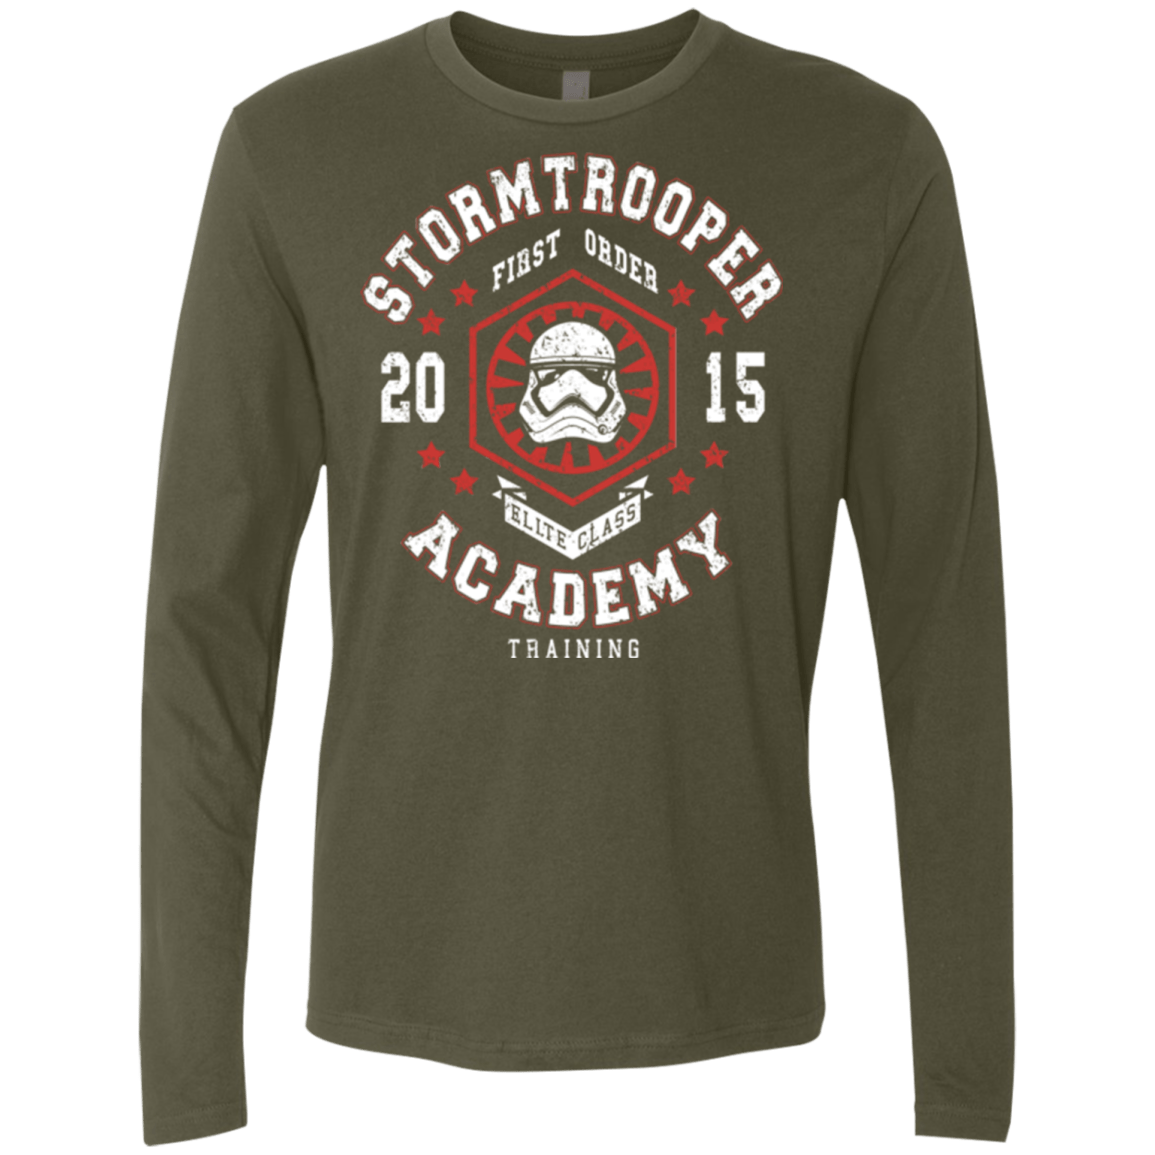 T-Shirts Military Green / Small Stormtrooper Academy 15 Men's Premium Long Sleeve